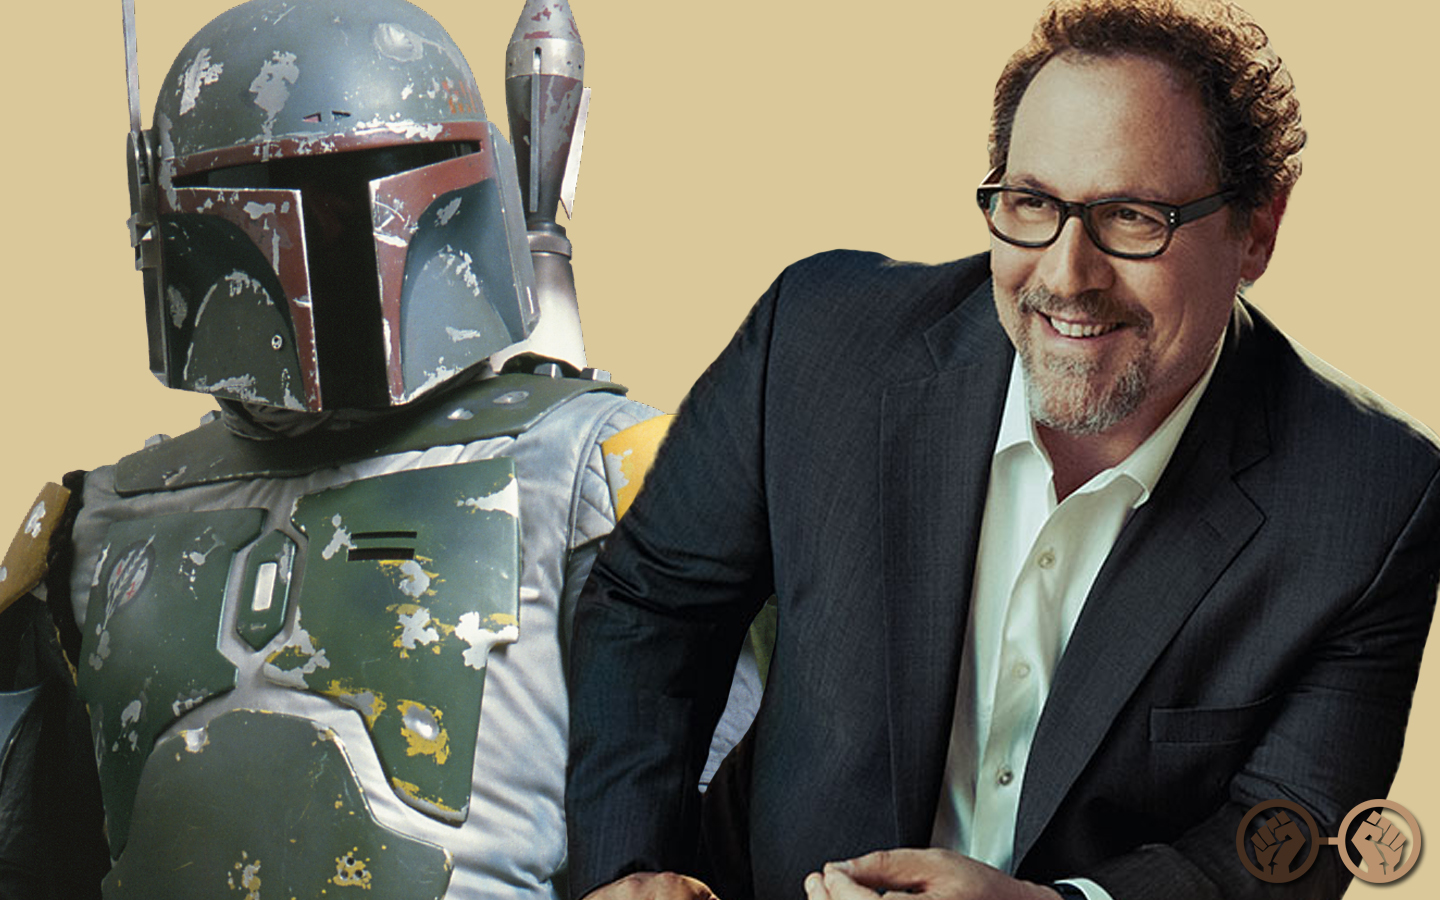 Production Has Begun for Jon Favreau’s ‘The Mandalorian’; Synopsis and Directors Revealed